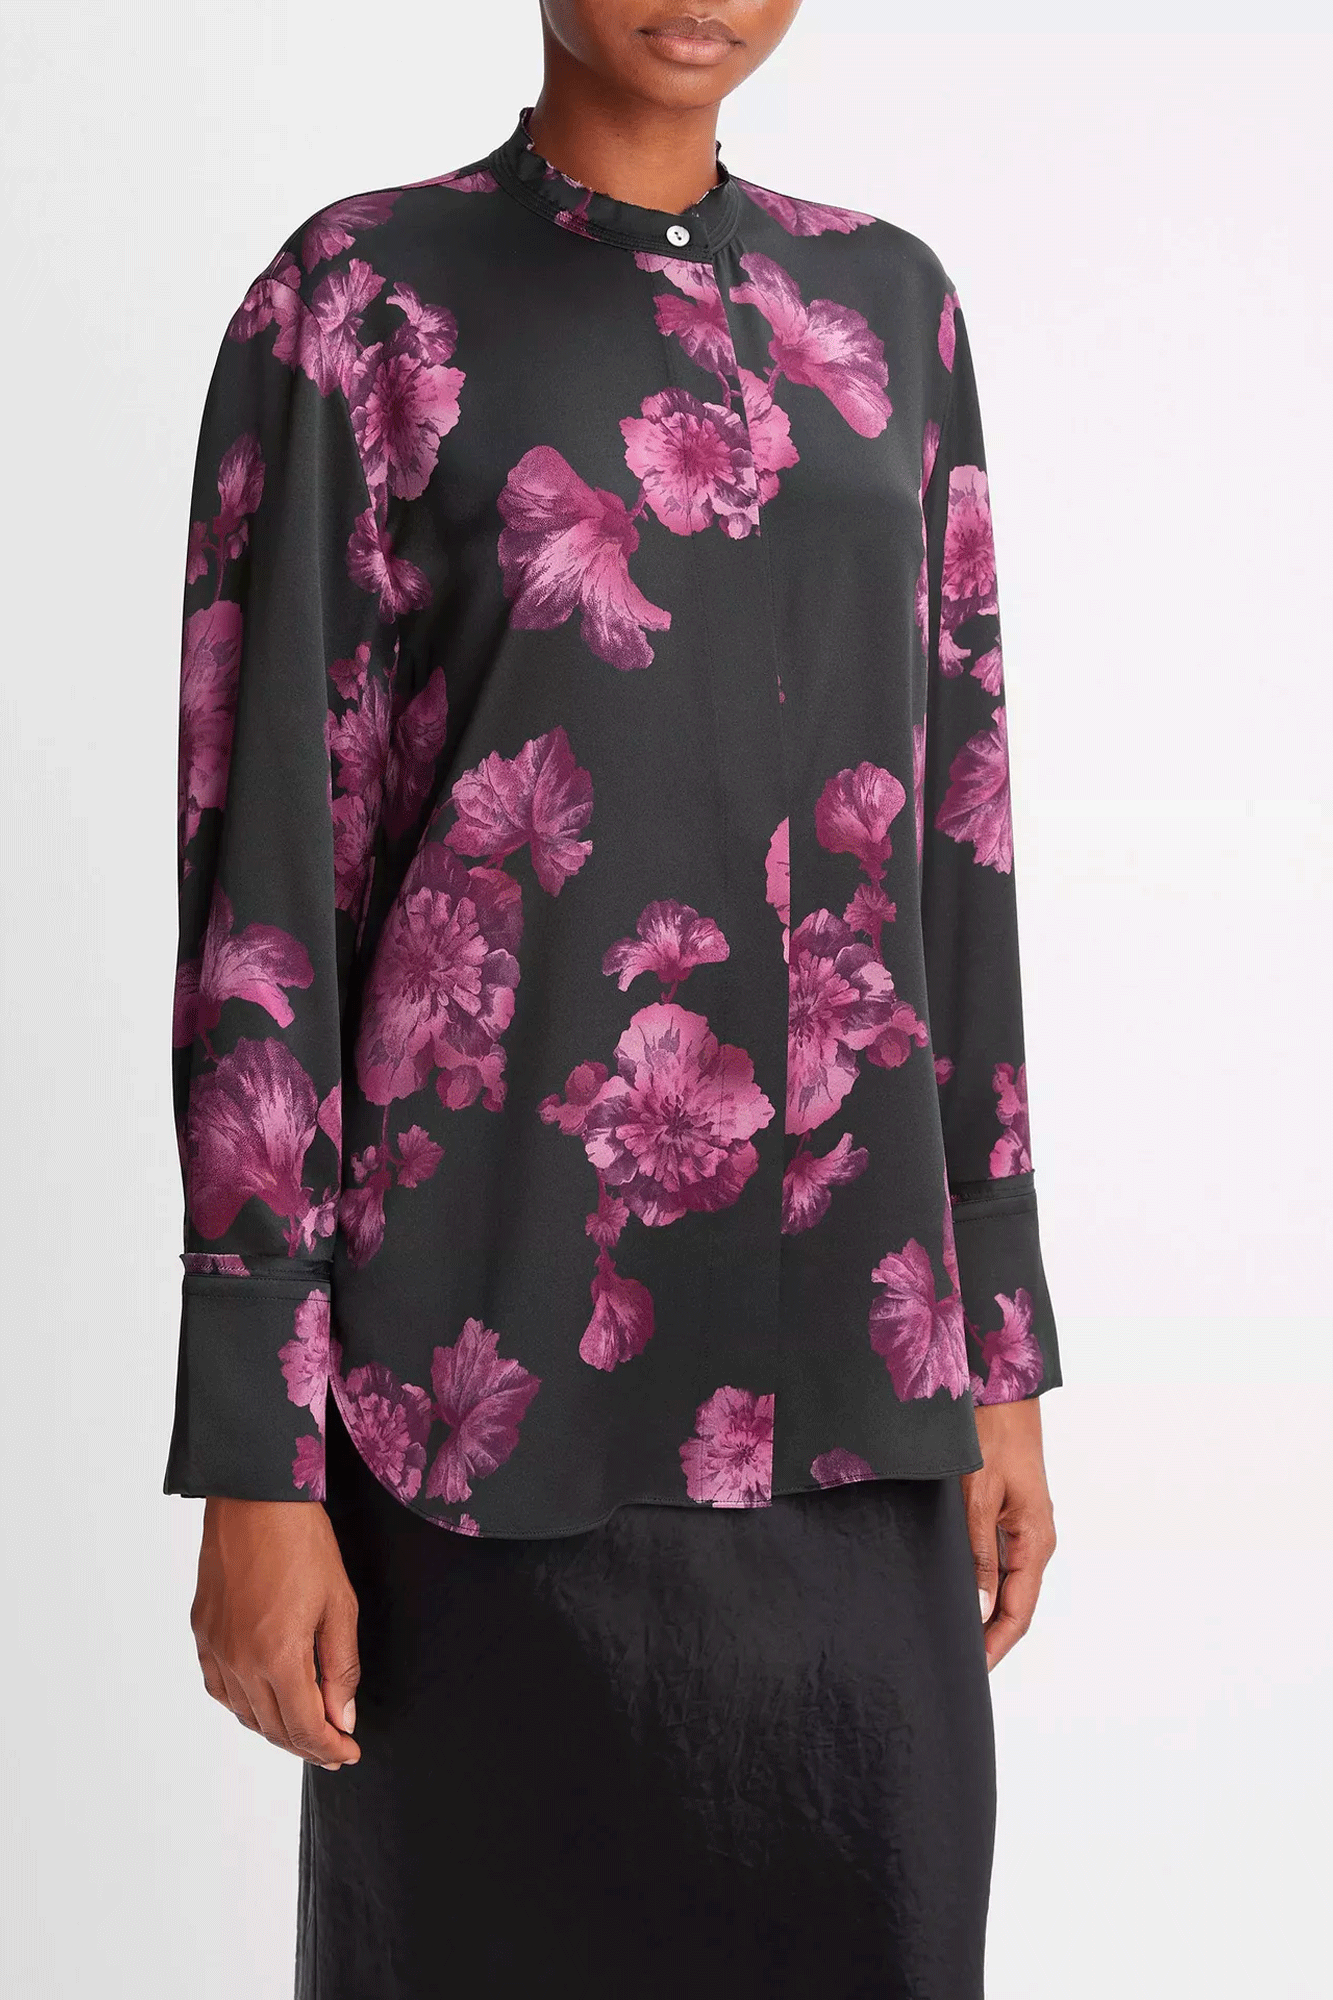 The Begonia Band Collar Blouse from Vince is crafted from luxurious silk satin and features a beautiful begonia print. A hidden placket gives a smooth, polished look, and double-layer raw-edge stitching adds an eye-catching element. Perfect for formal and dressy occasions.